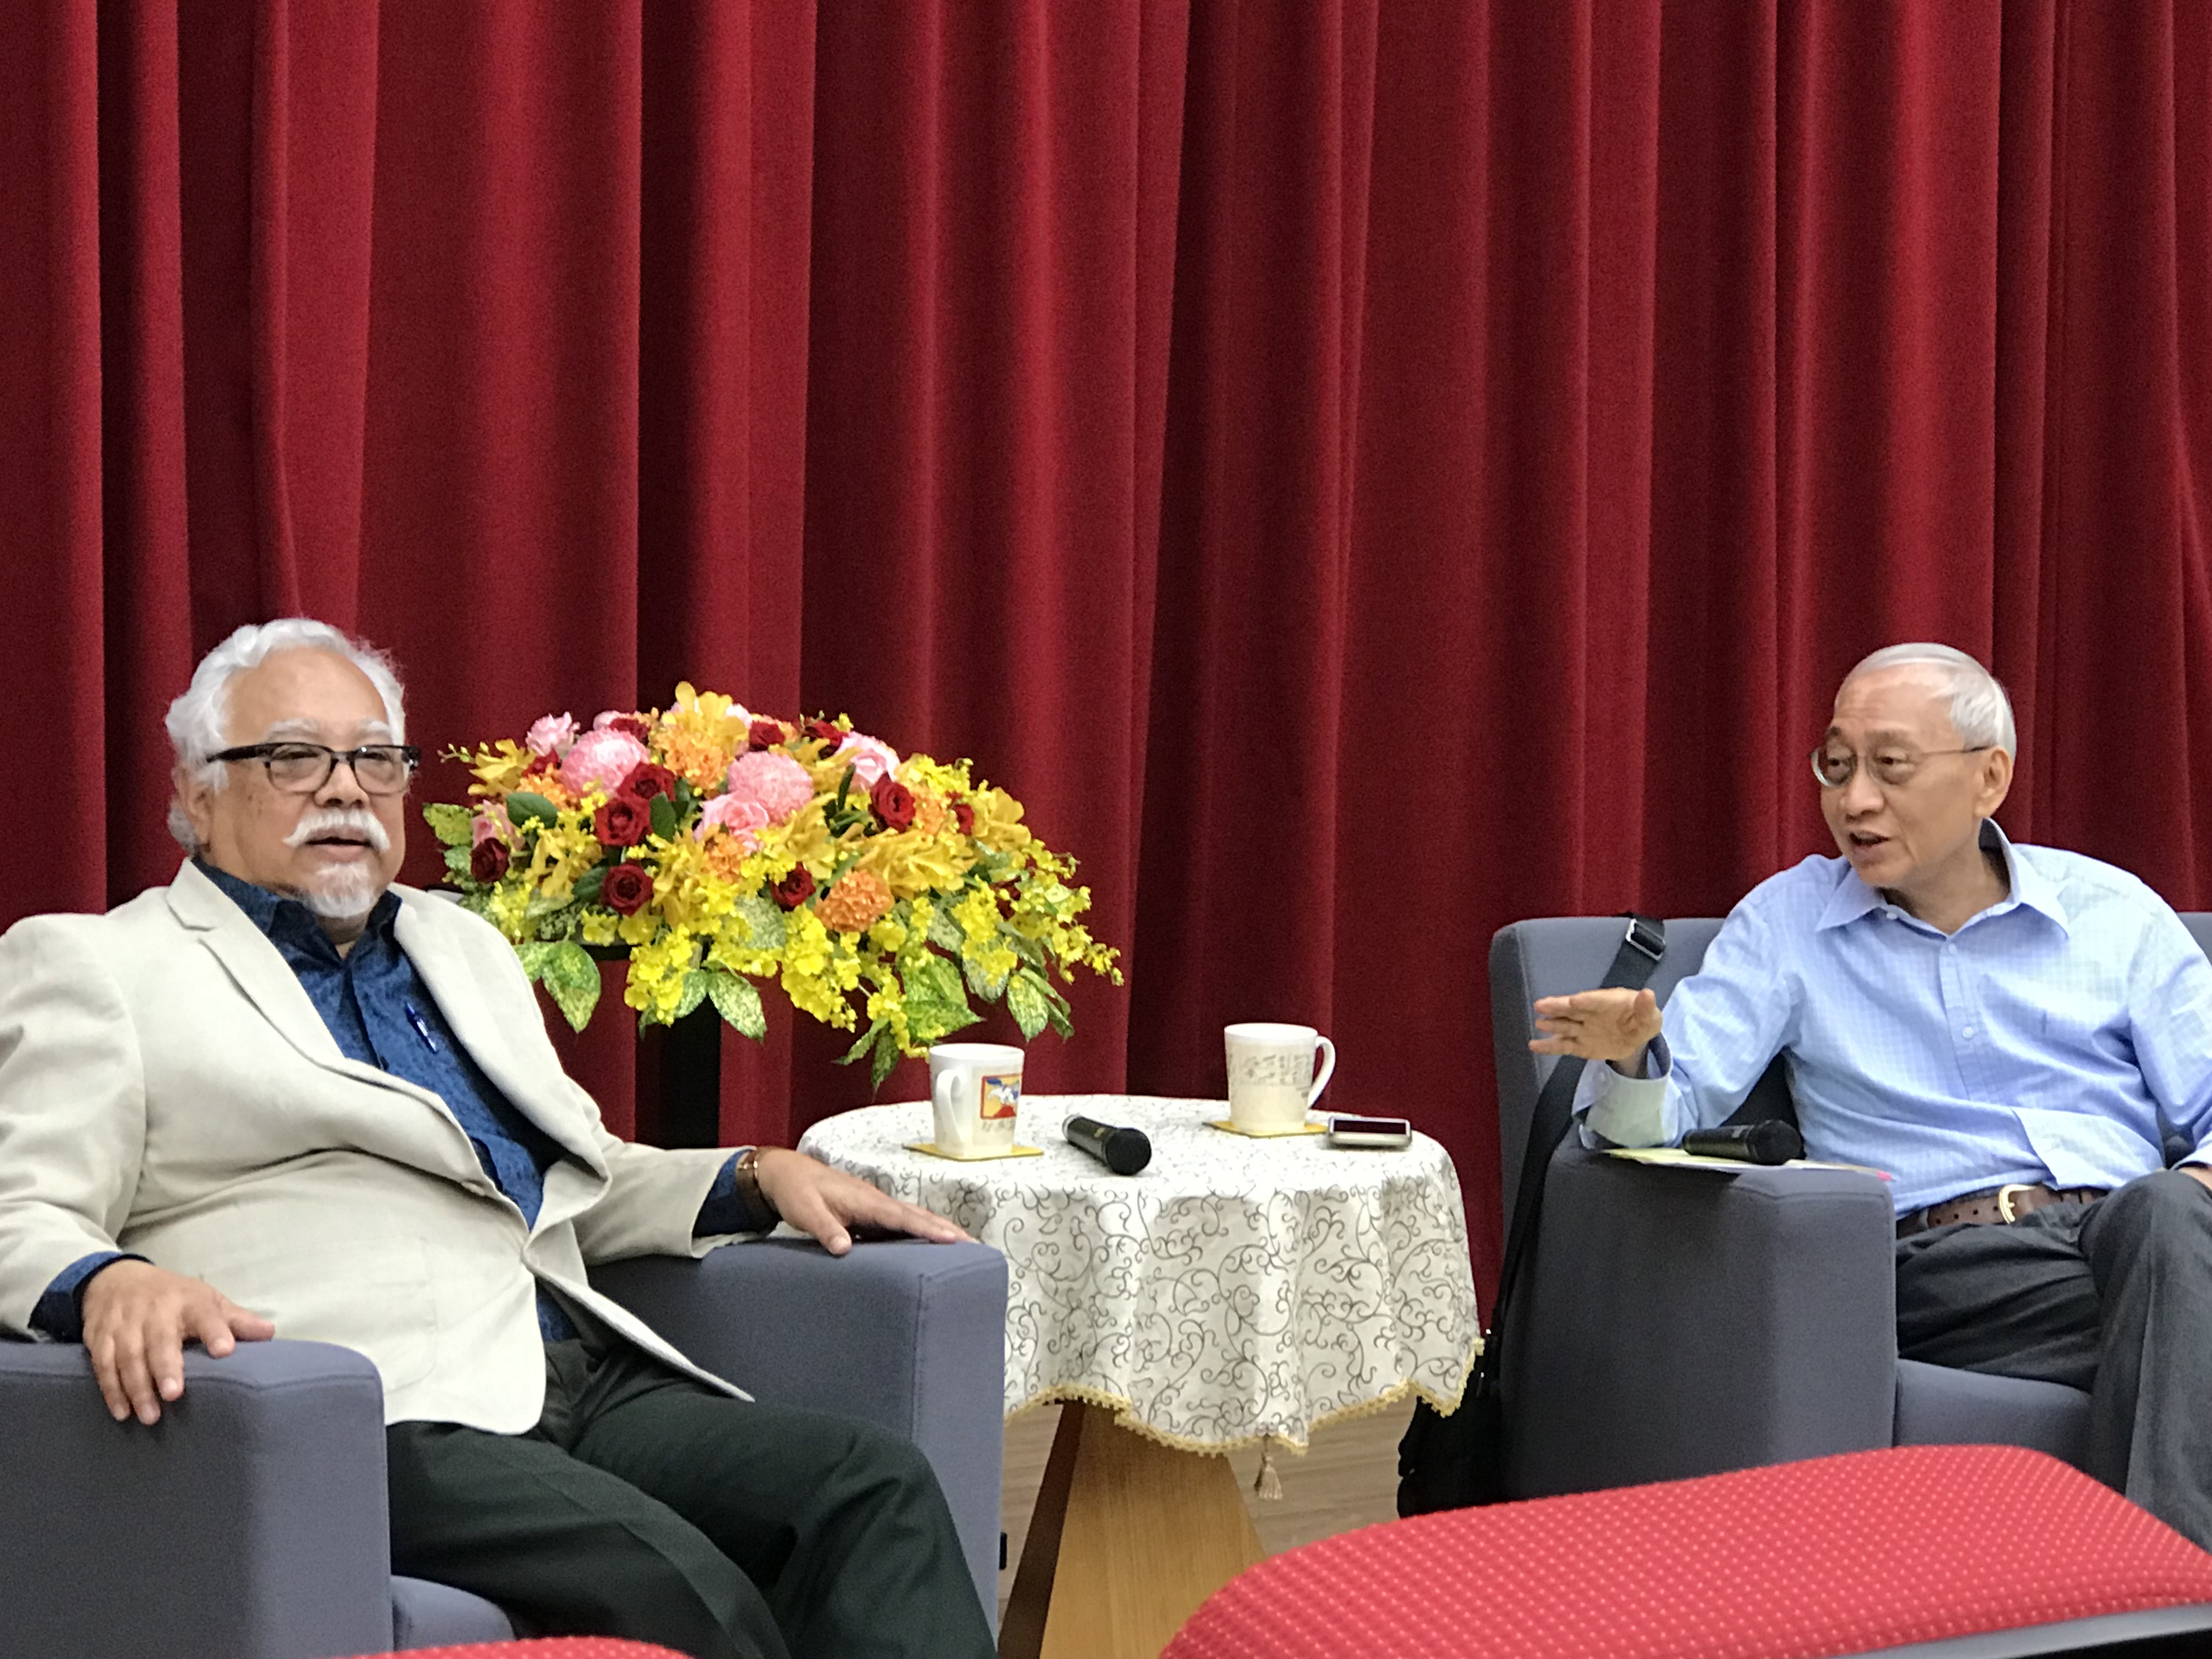 Professor Duara (left) gives his first talk in Academia Sinica on July 11, talking about digital diplomacy and new world order